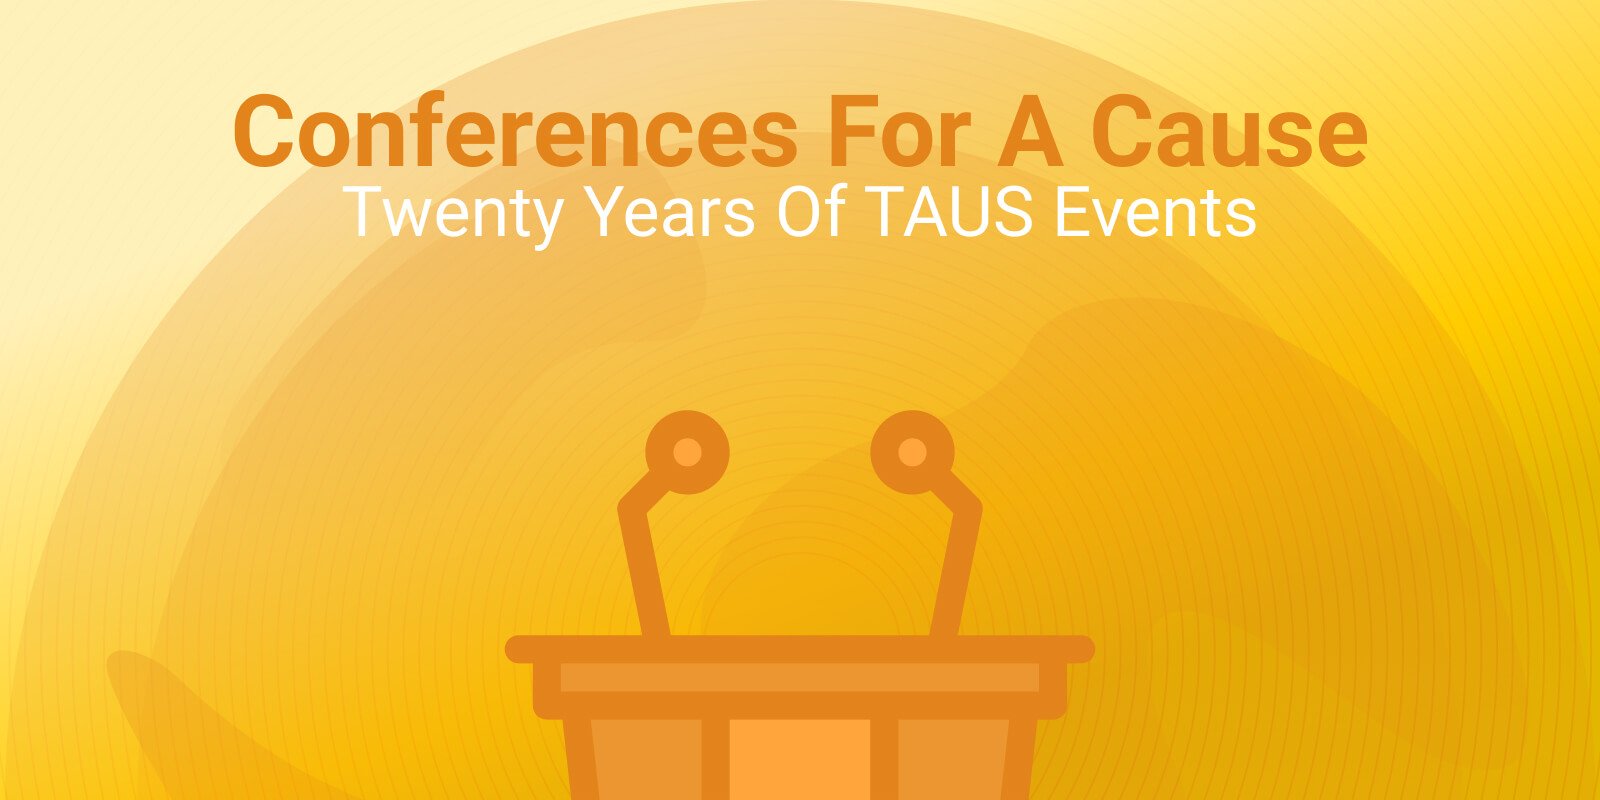 conferences-for-a-cause-twenty-years-of-taus-events